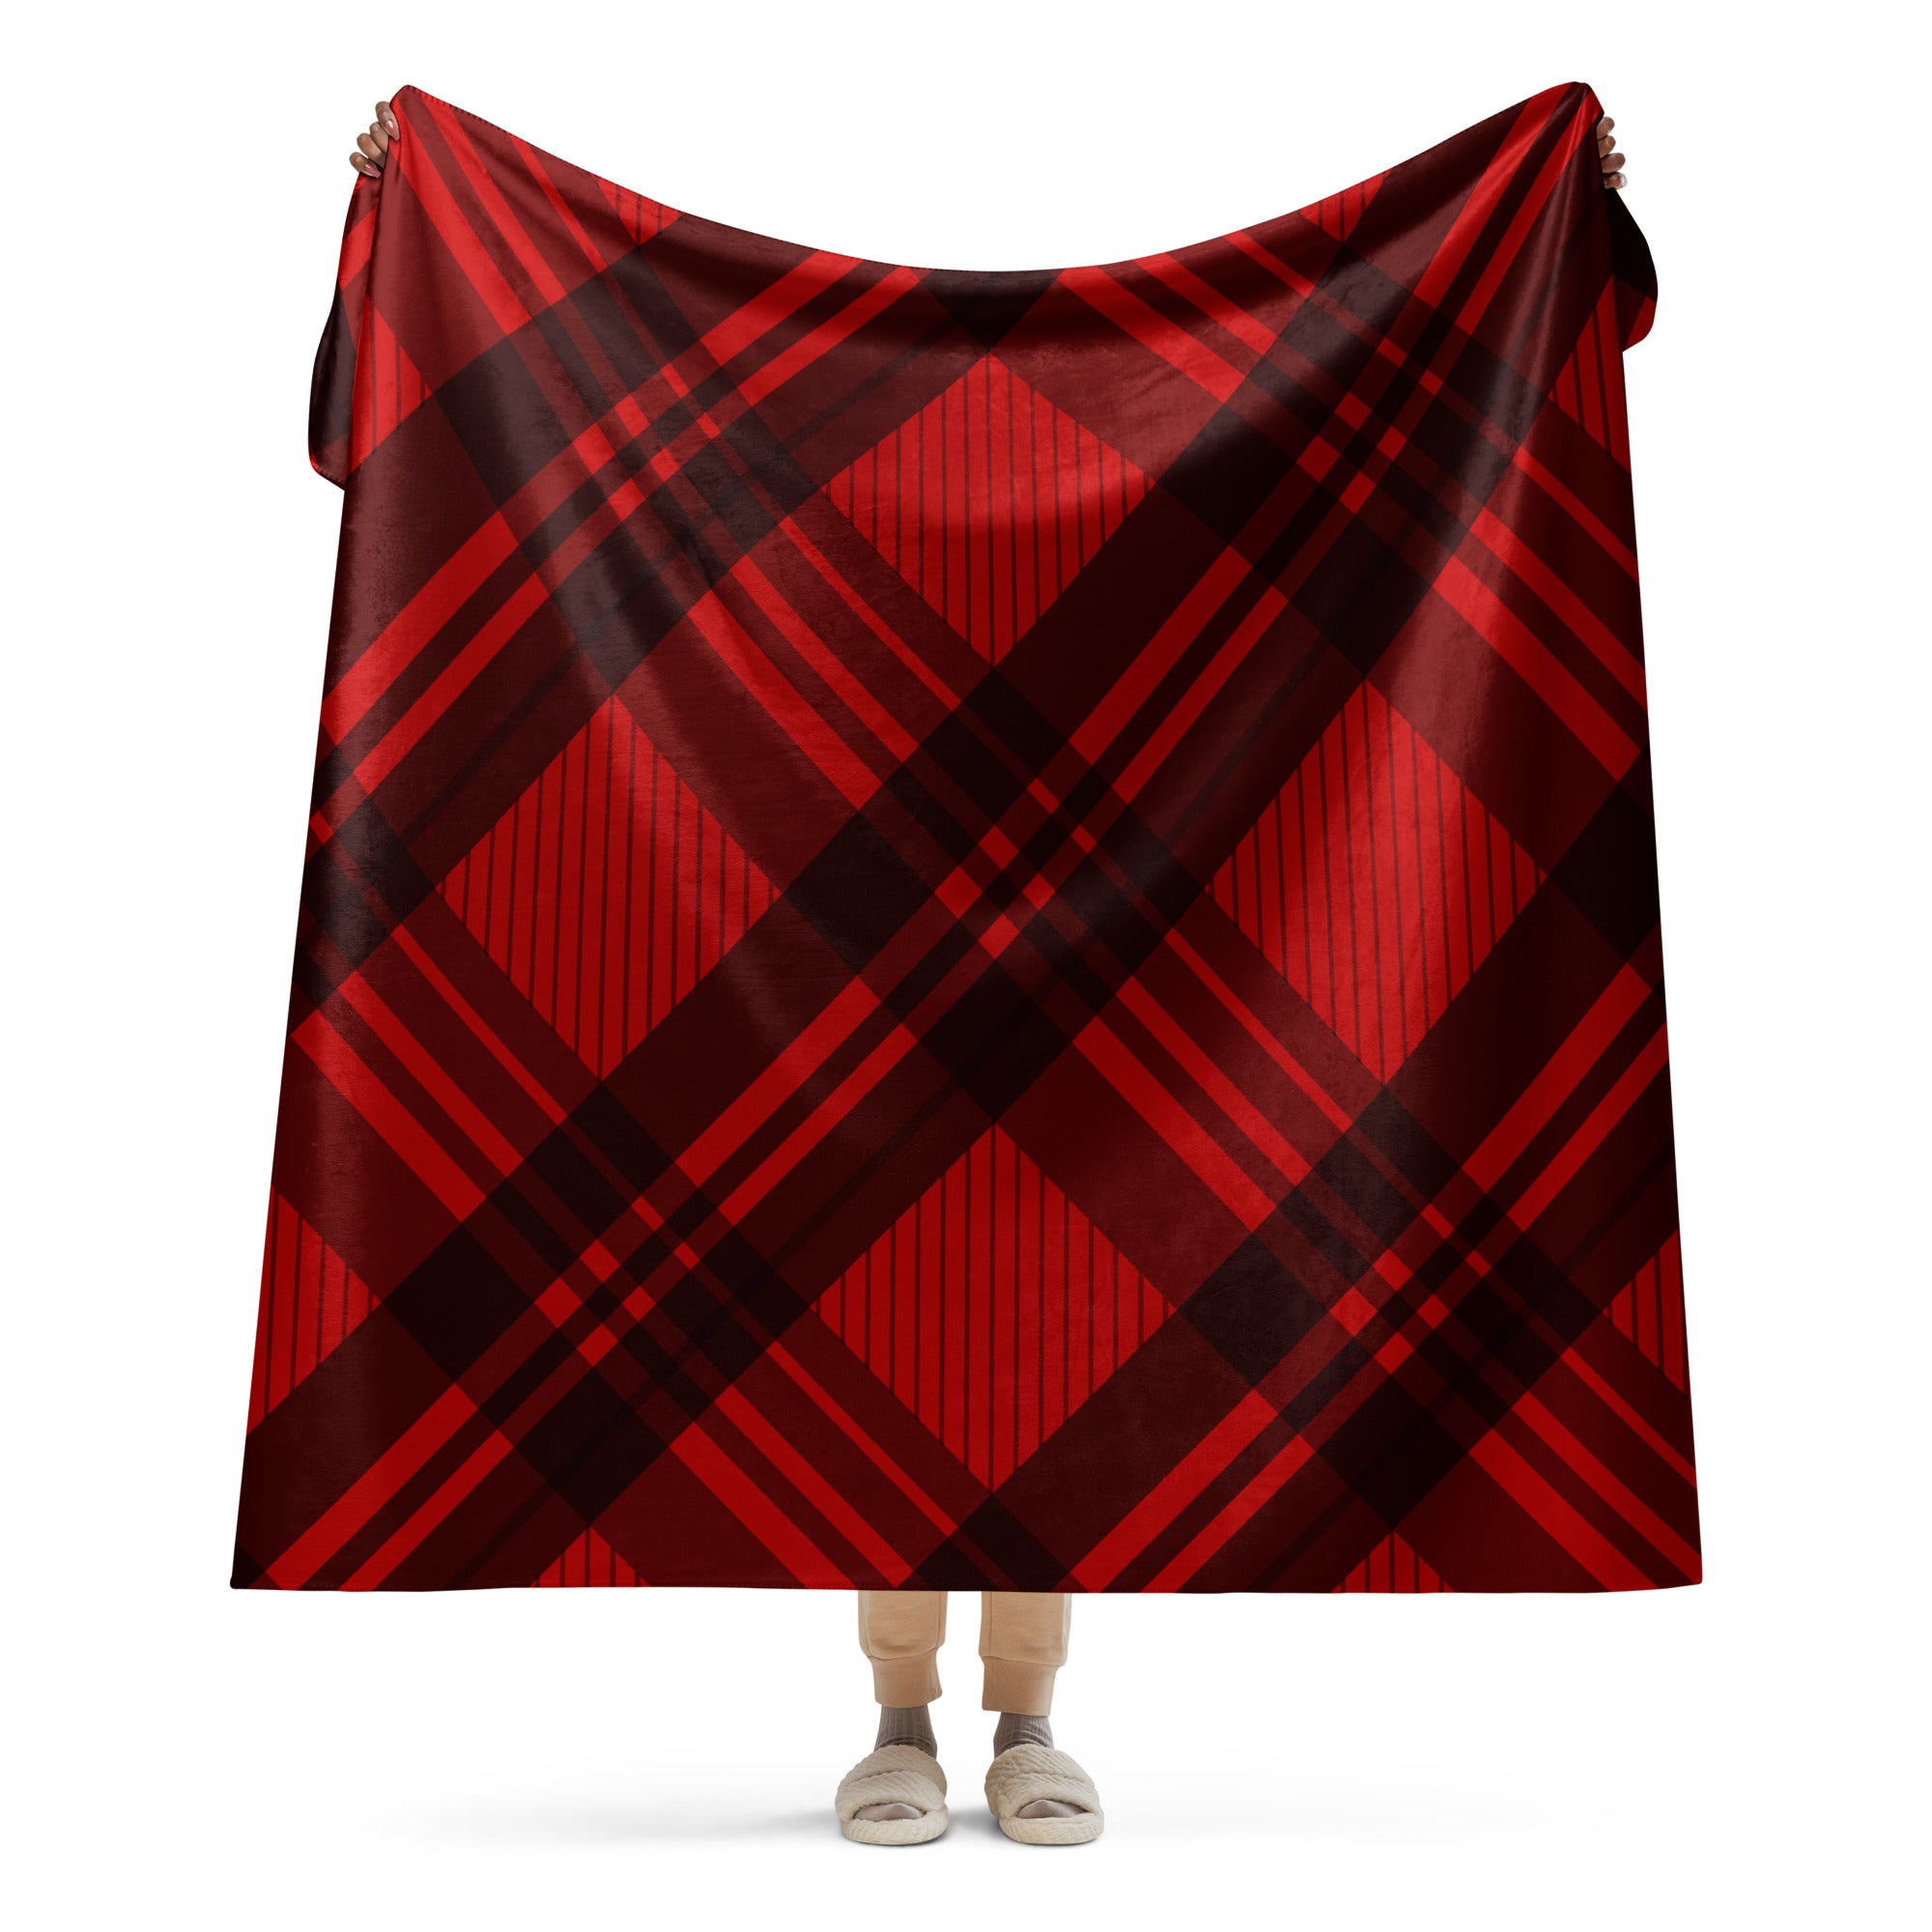 Plaid Red and Black Sherpa blanket